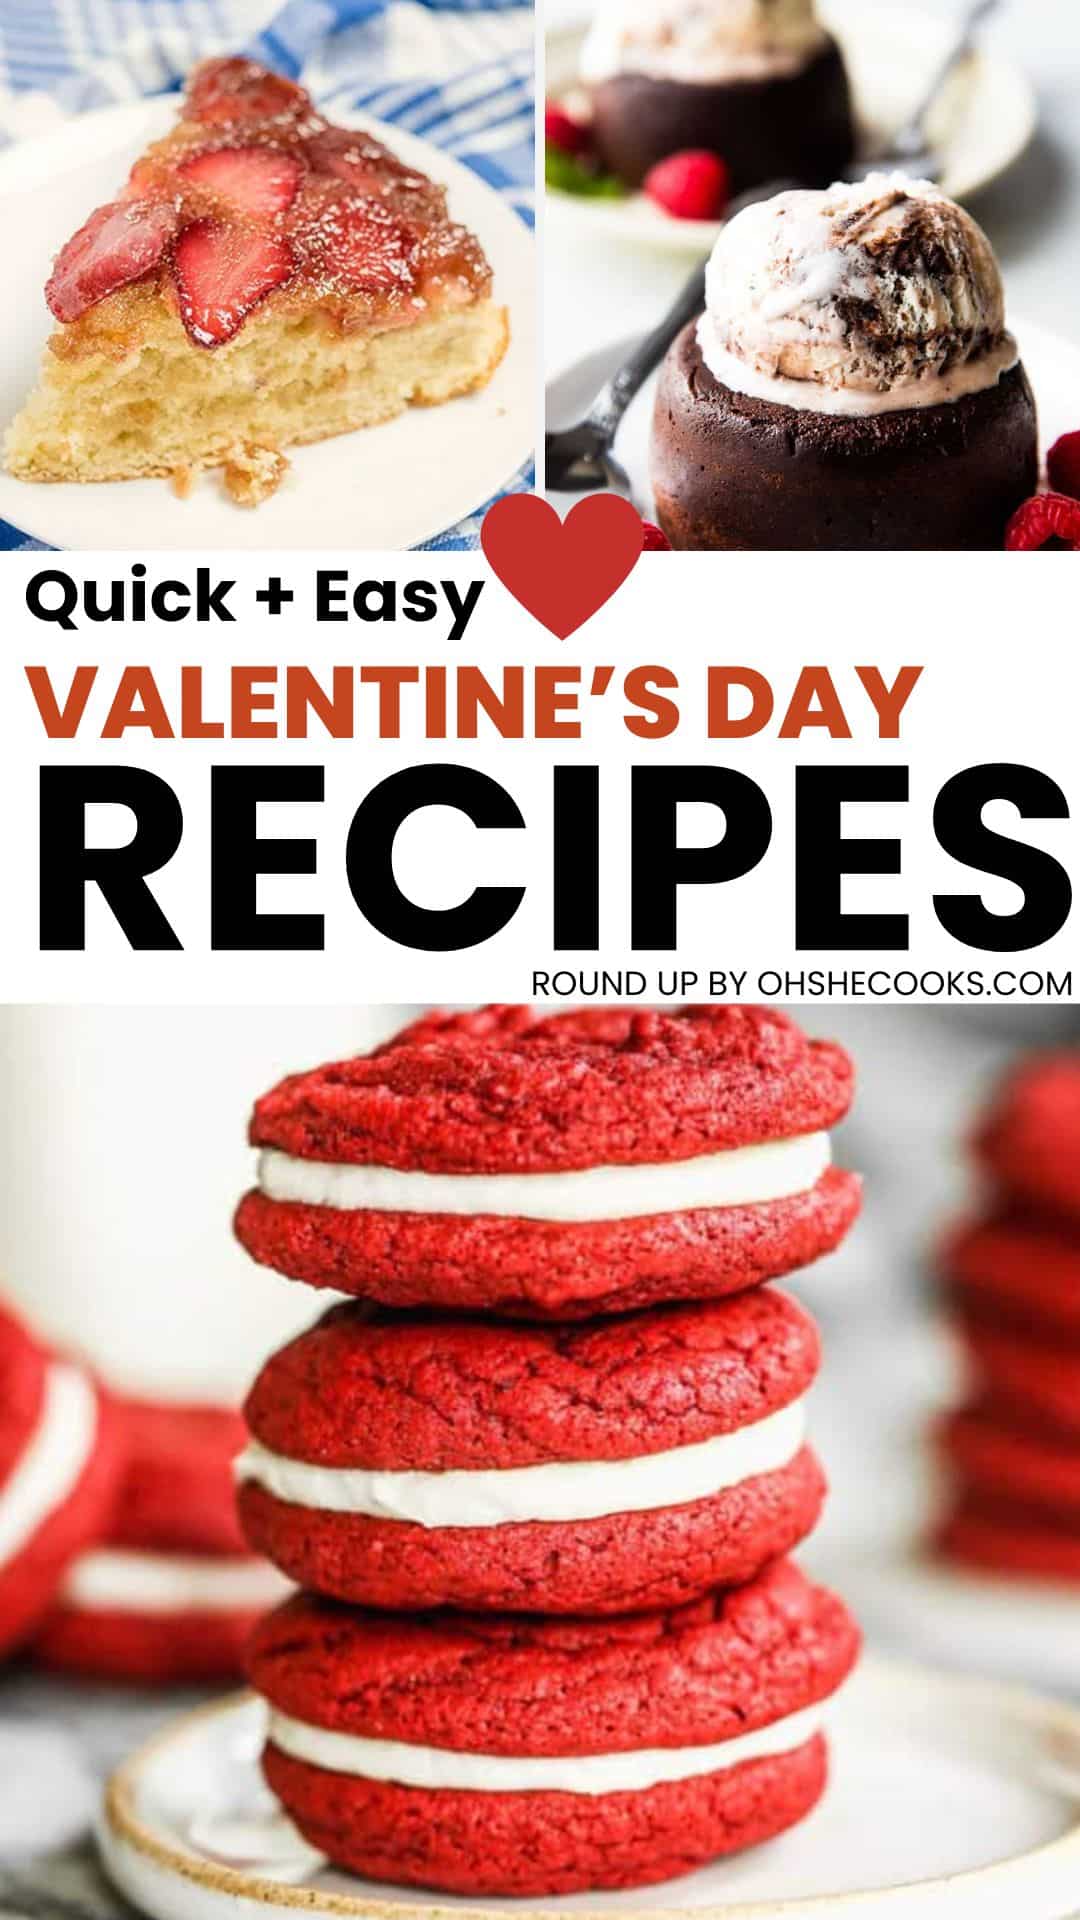 Sweet and Simple: Quick Valentine’s Day Recipes to Swoon Over